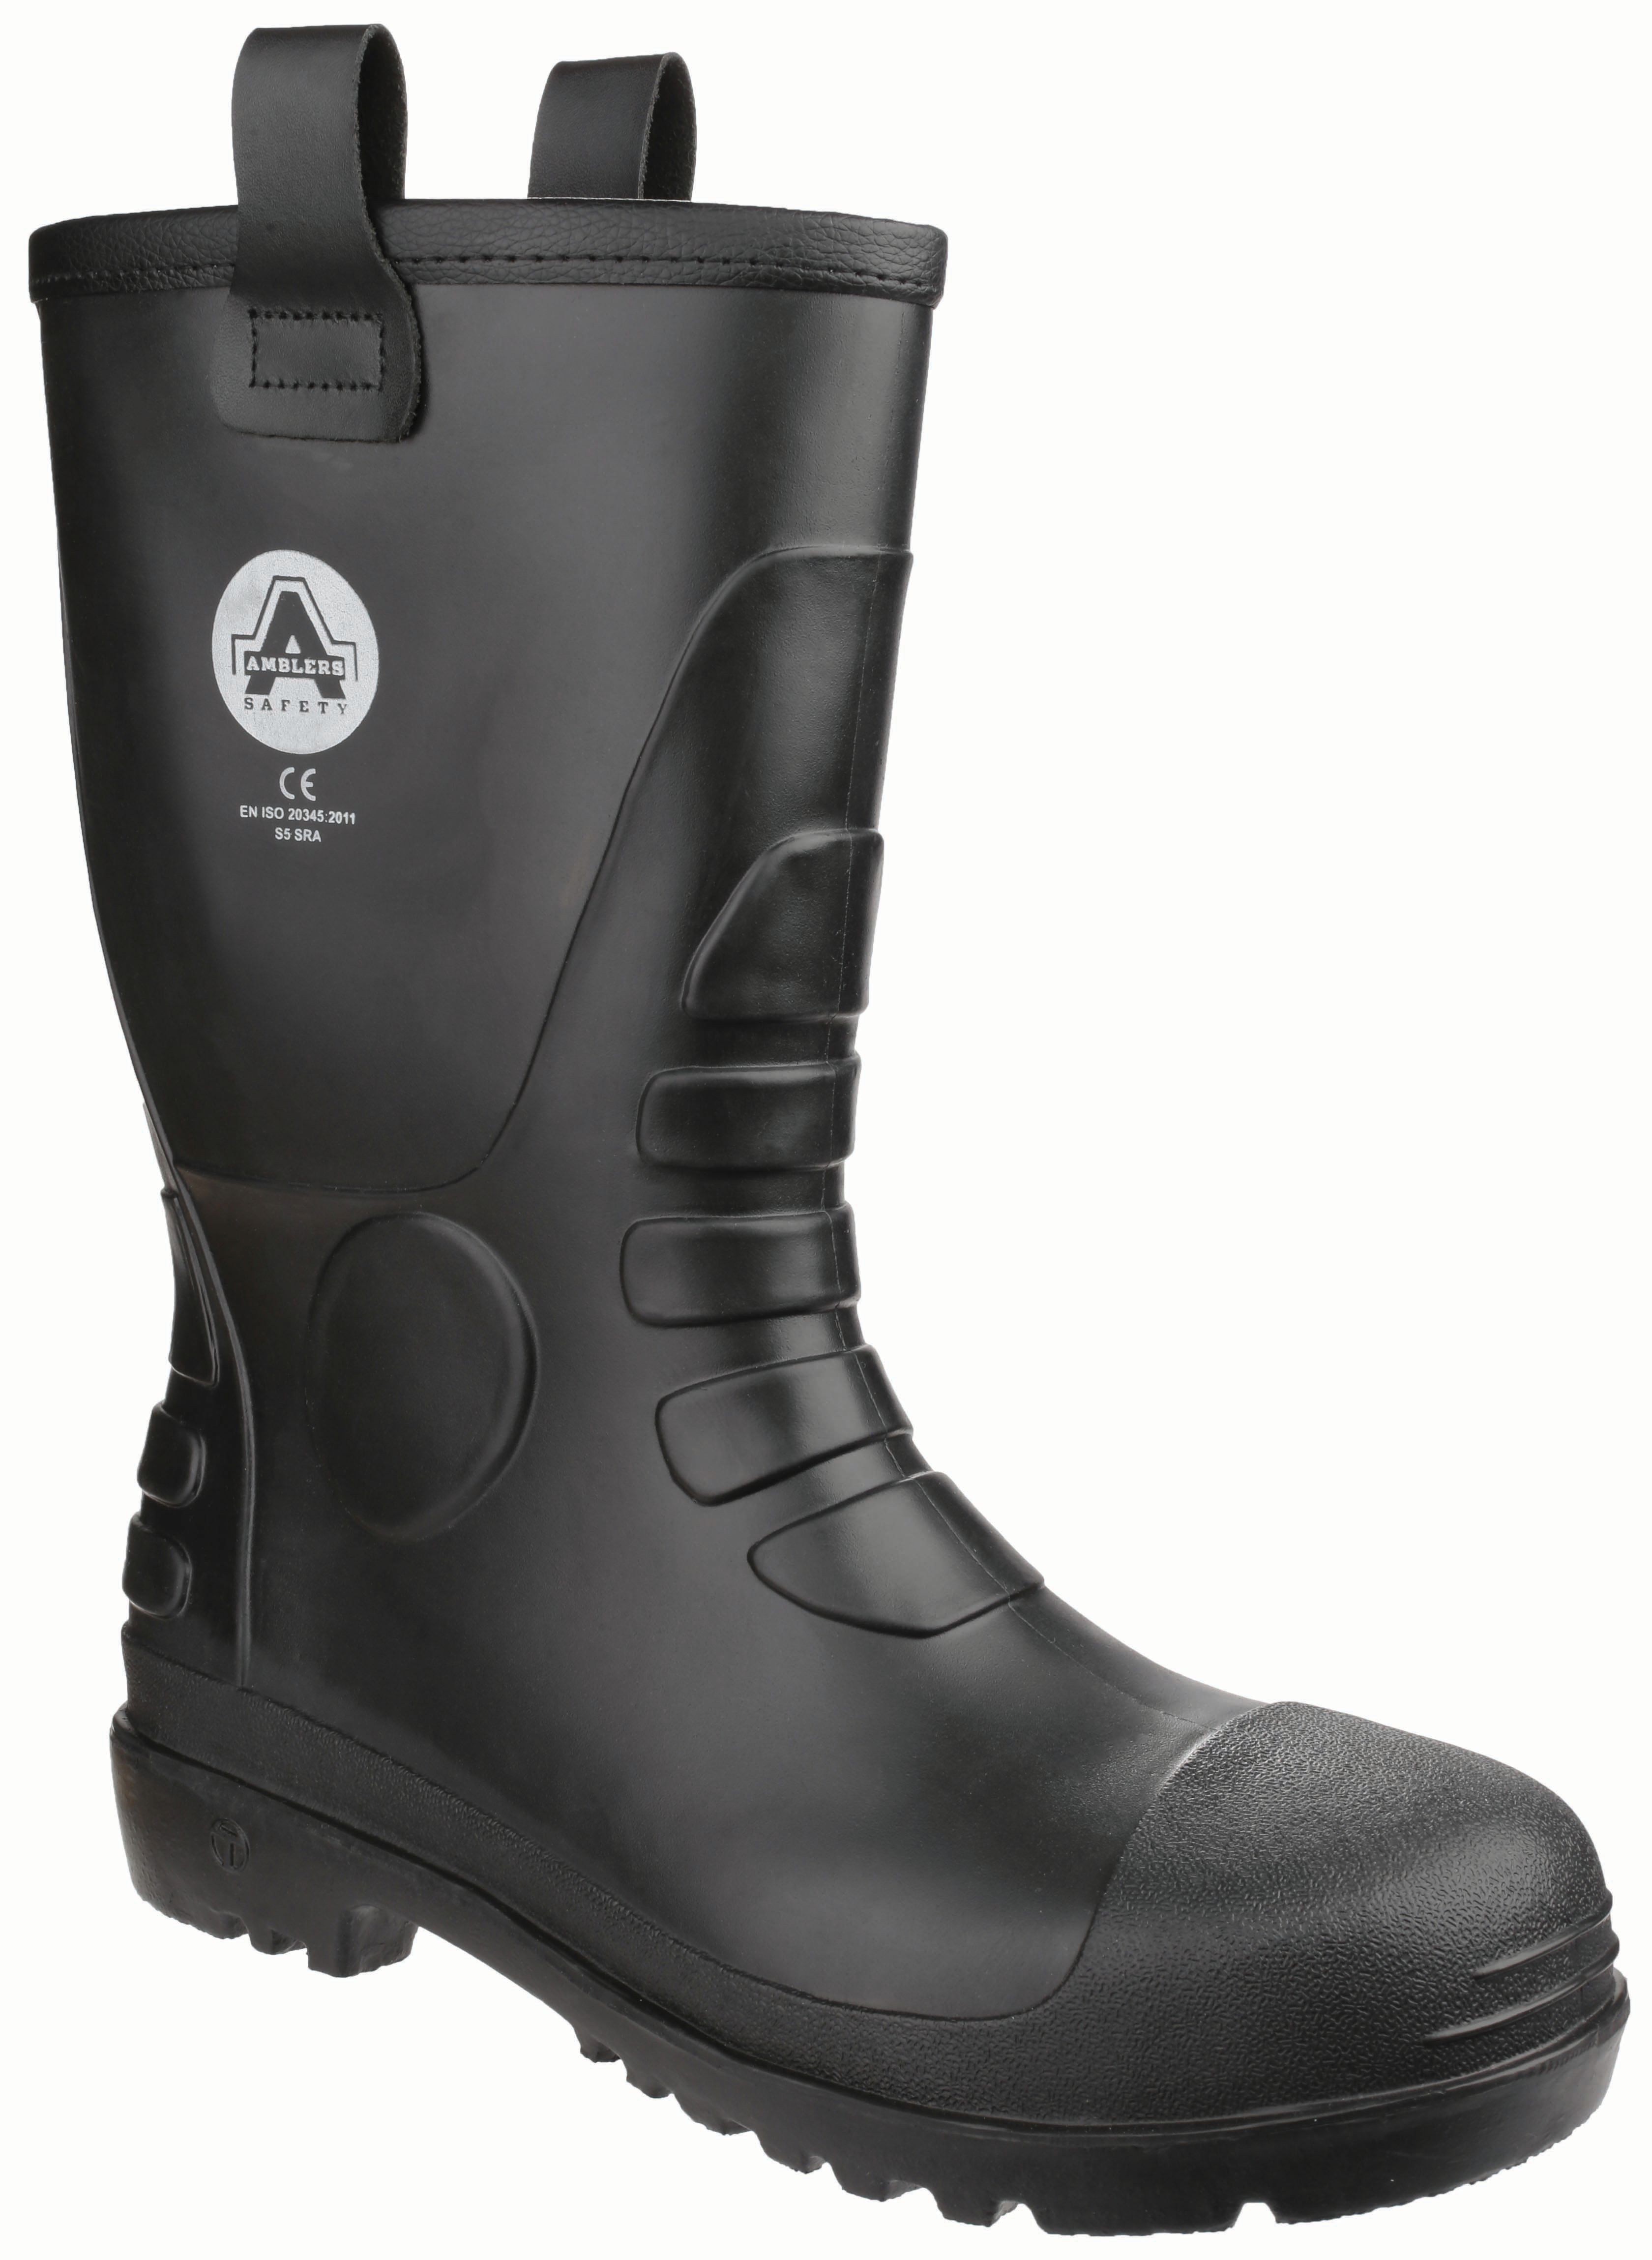 Image of Amblers Safety FS90 Rigger Safety Boot - Black Size 12